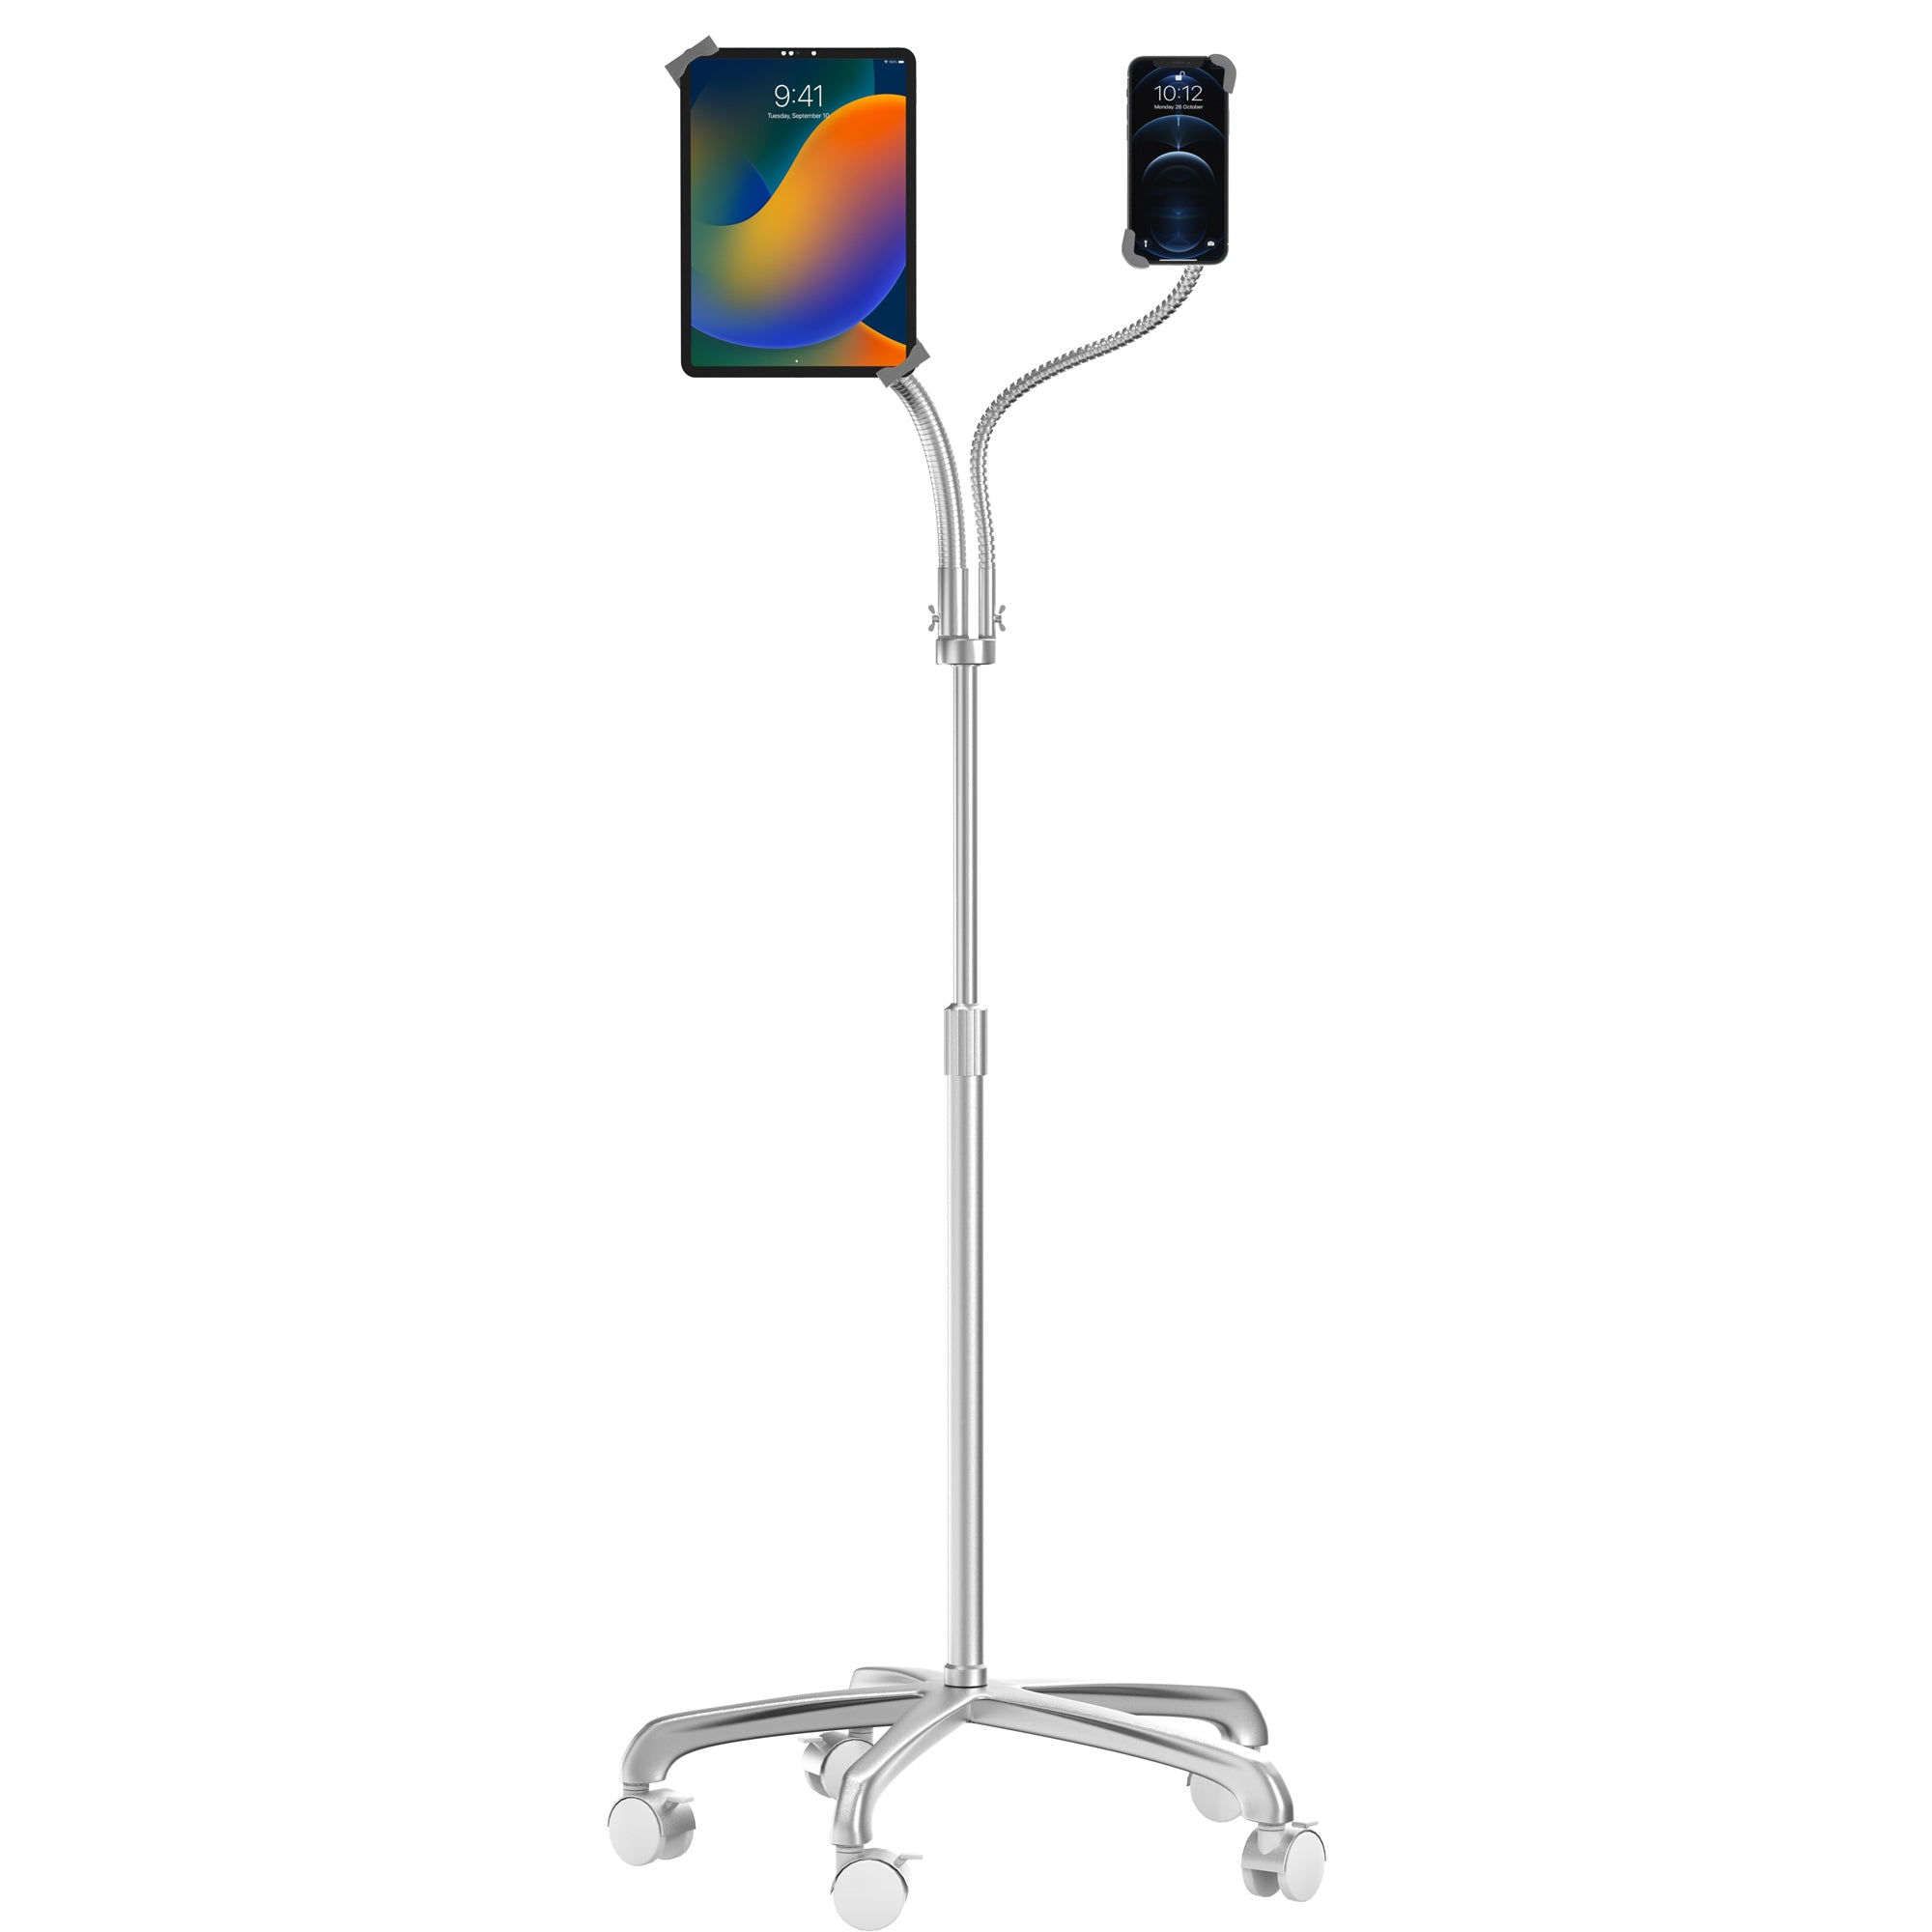 Heavy-Duty Security Floor Stand with Dual Goosenecks for Phone and Tablet